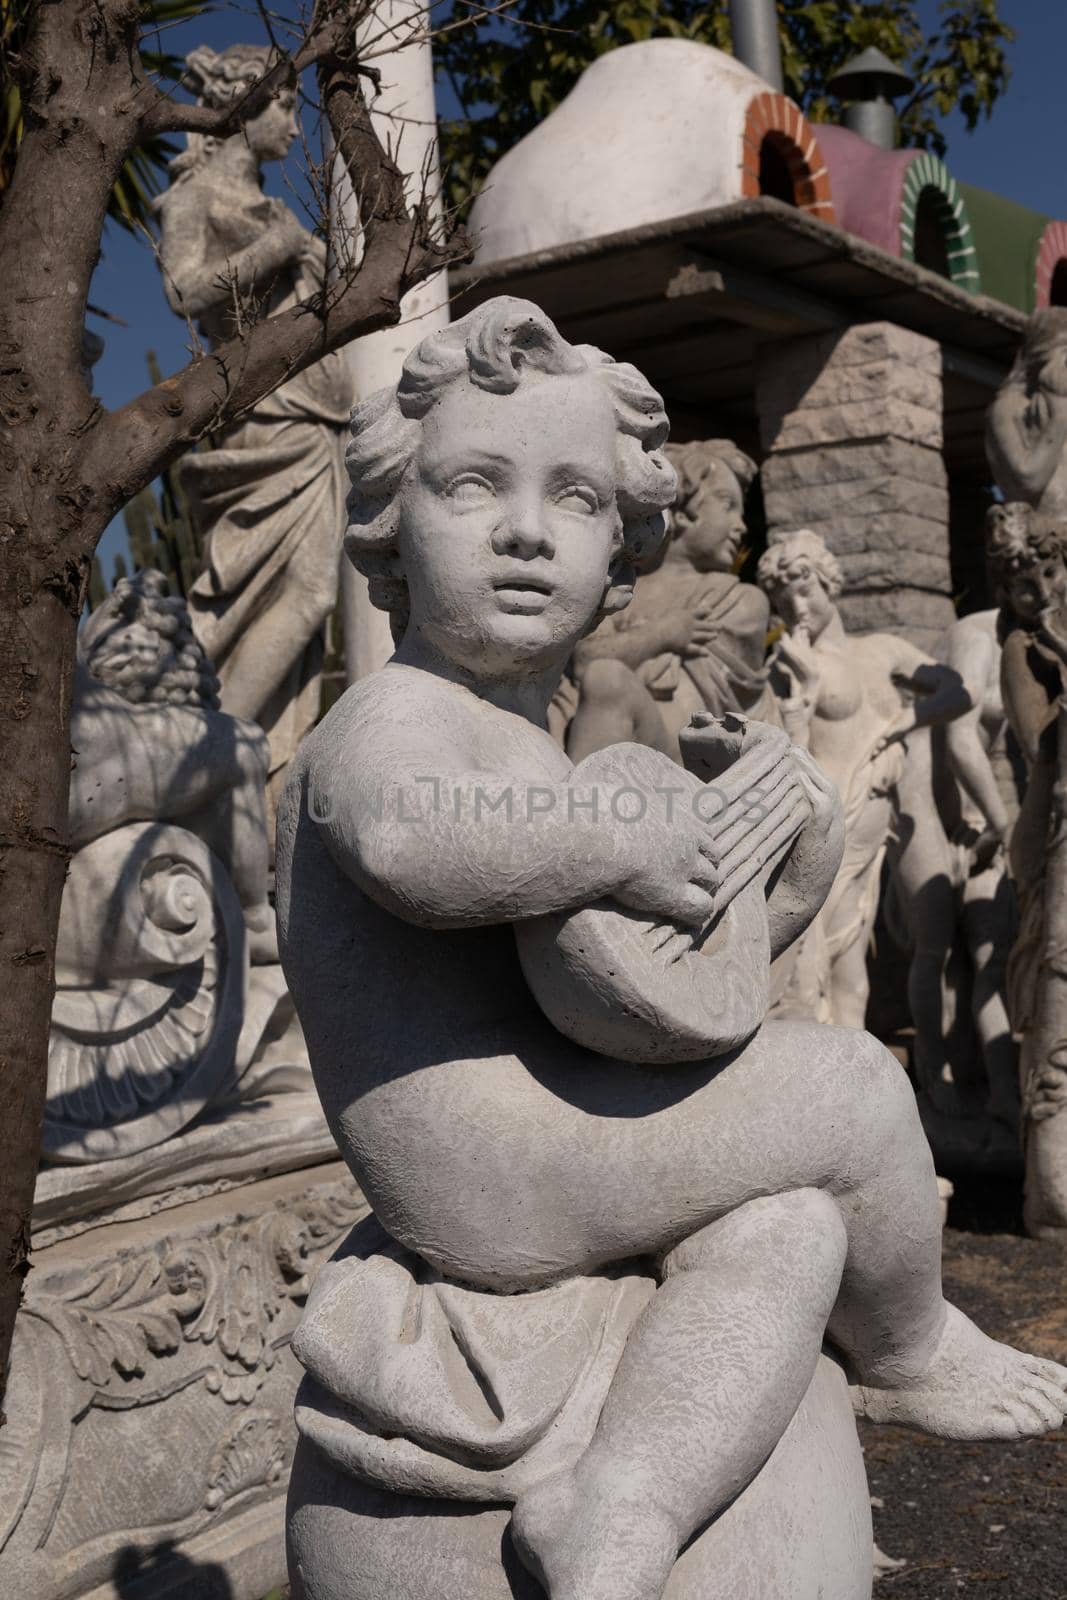 Ancient stone sculpture of naked cherub playing lute in reclamation yard. art and classical style romantic figurative stone sculpture.